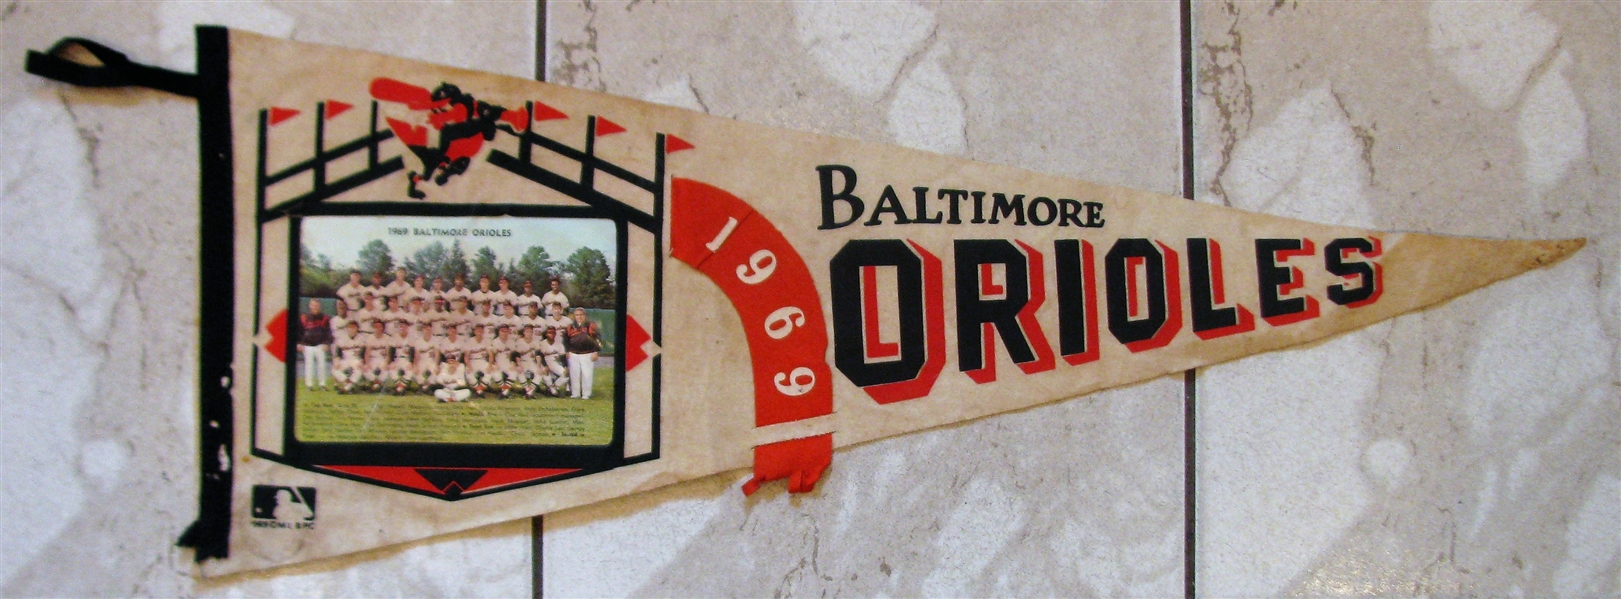 1969 BALTIMORE ORIOLES TEAM PICTURE PENNANT